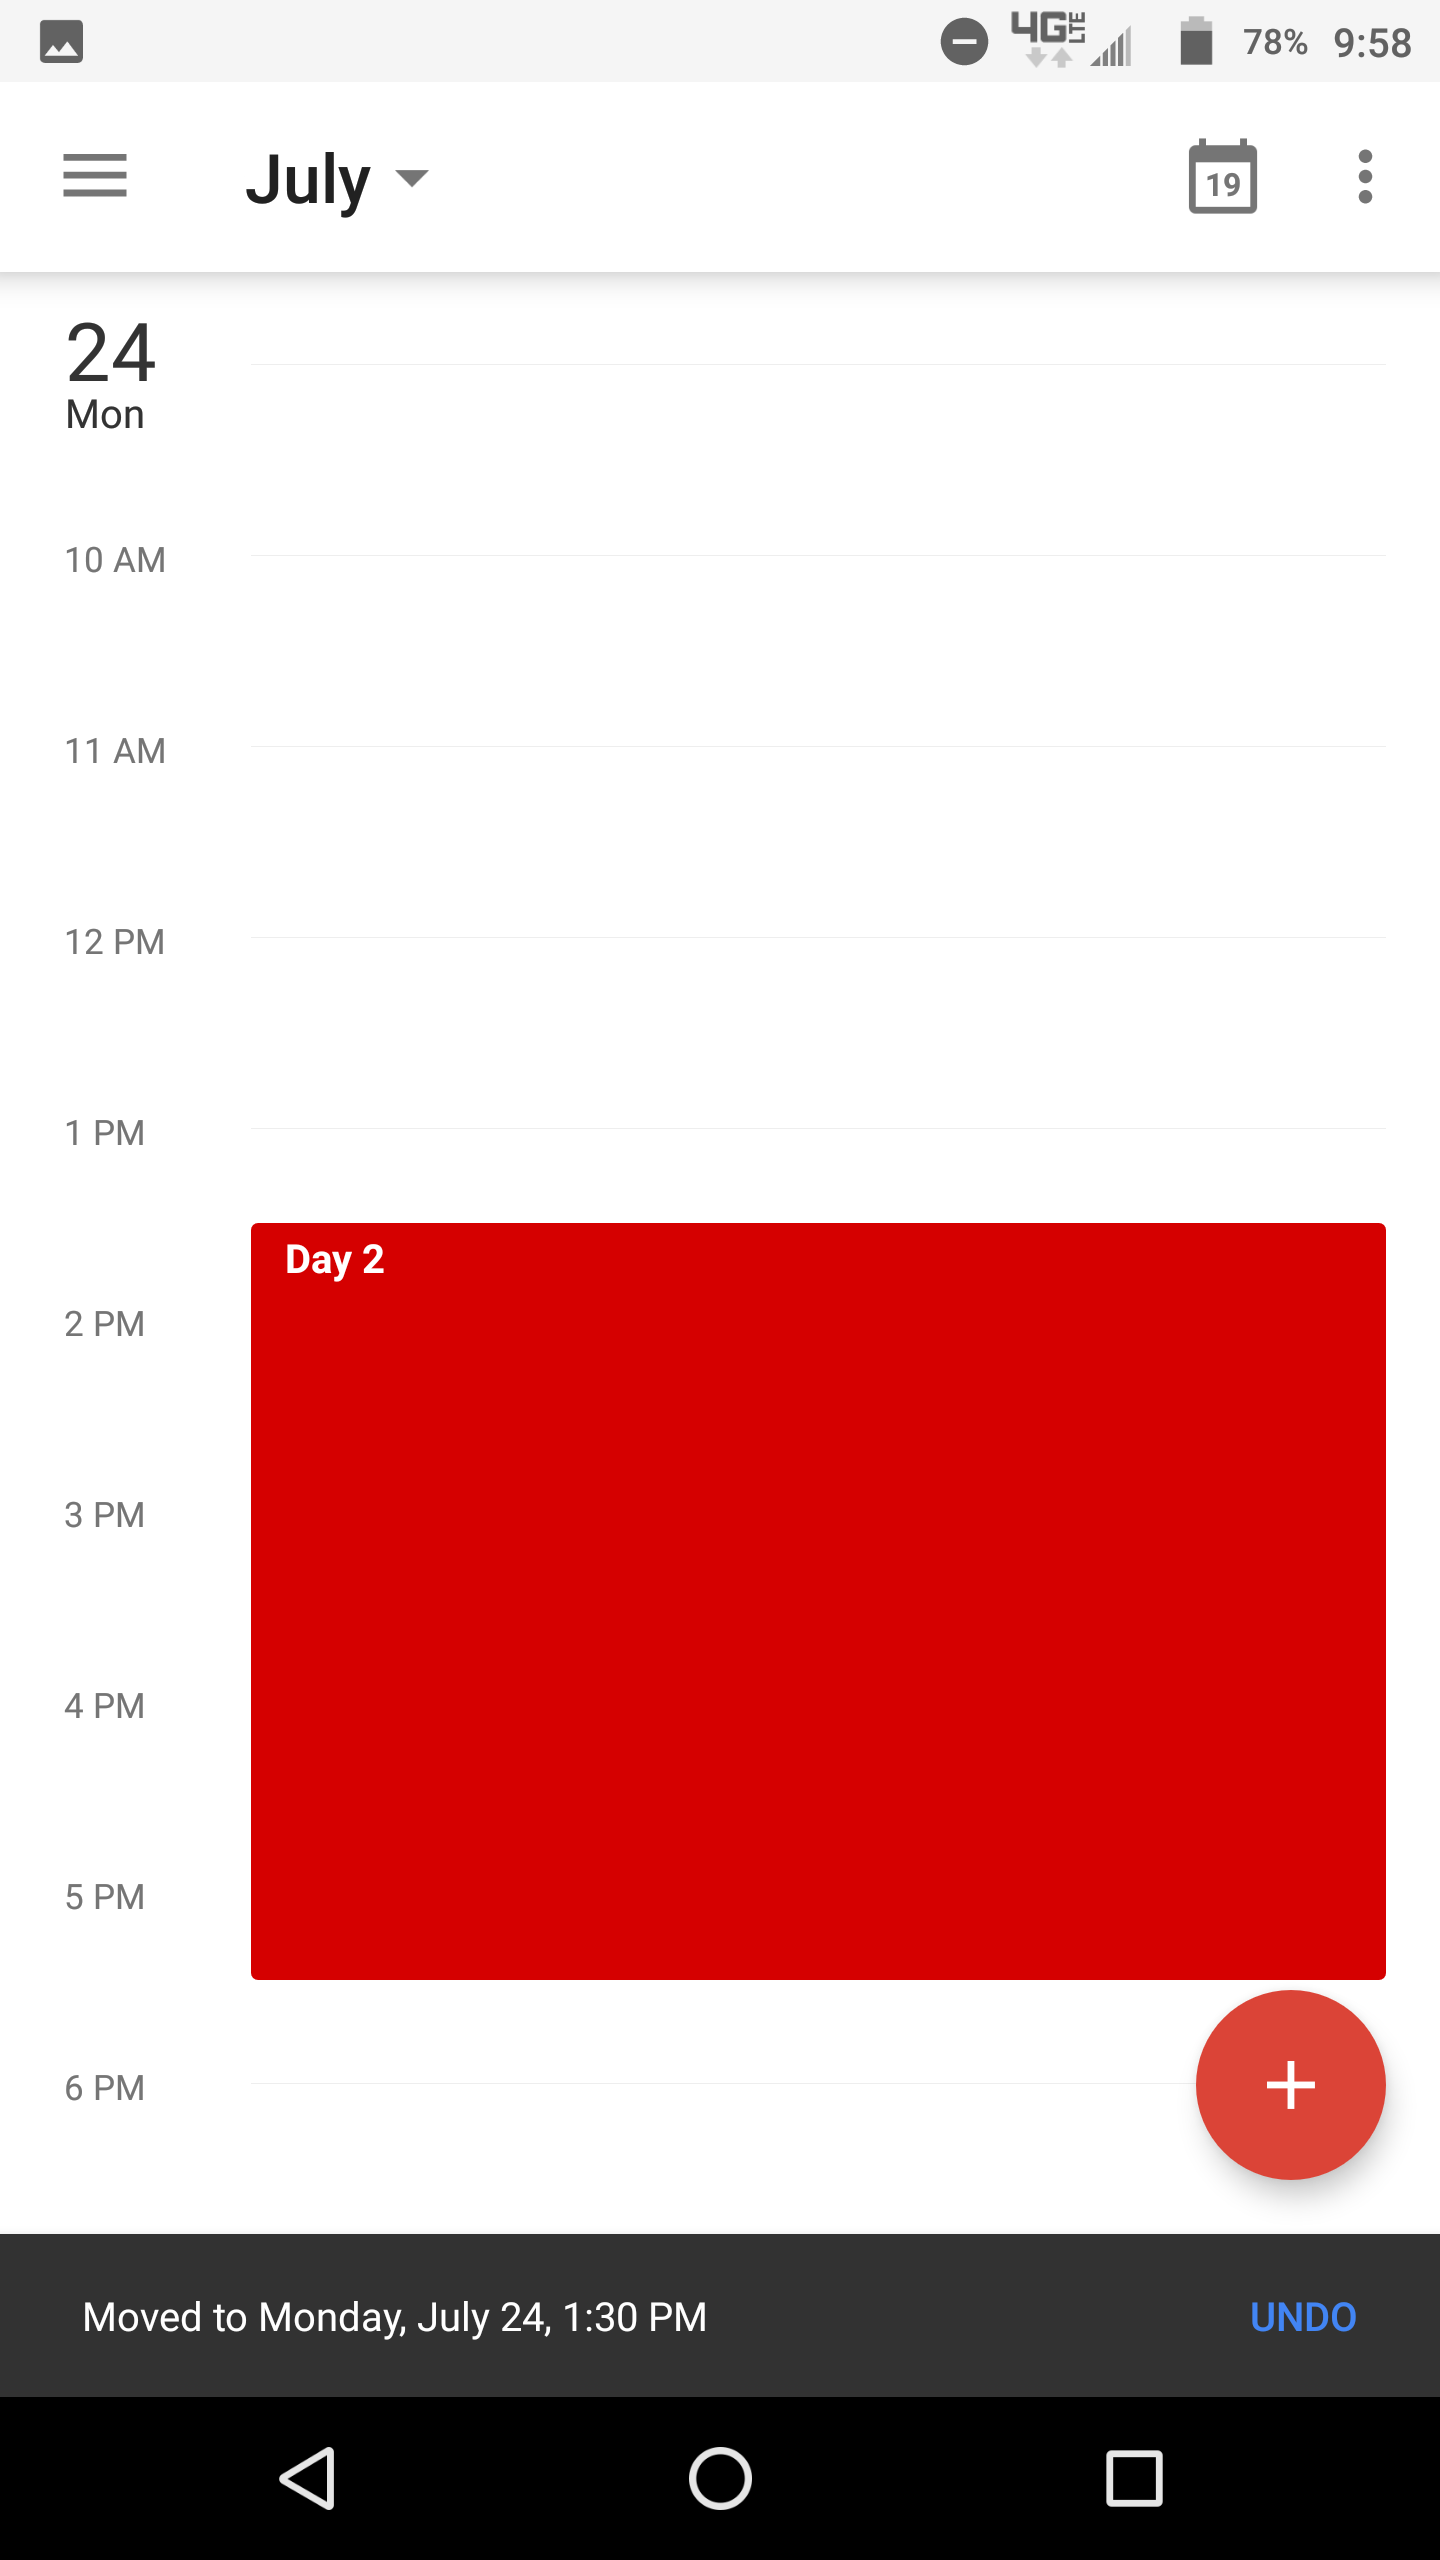 Google Calendar for Android adds drag & drop gesture to quickly edit